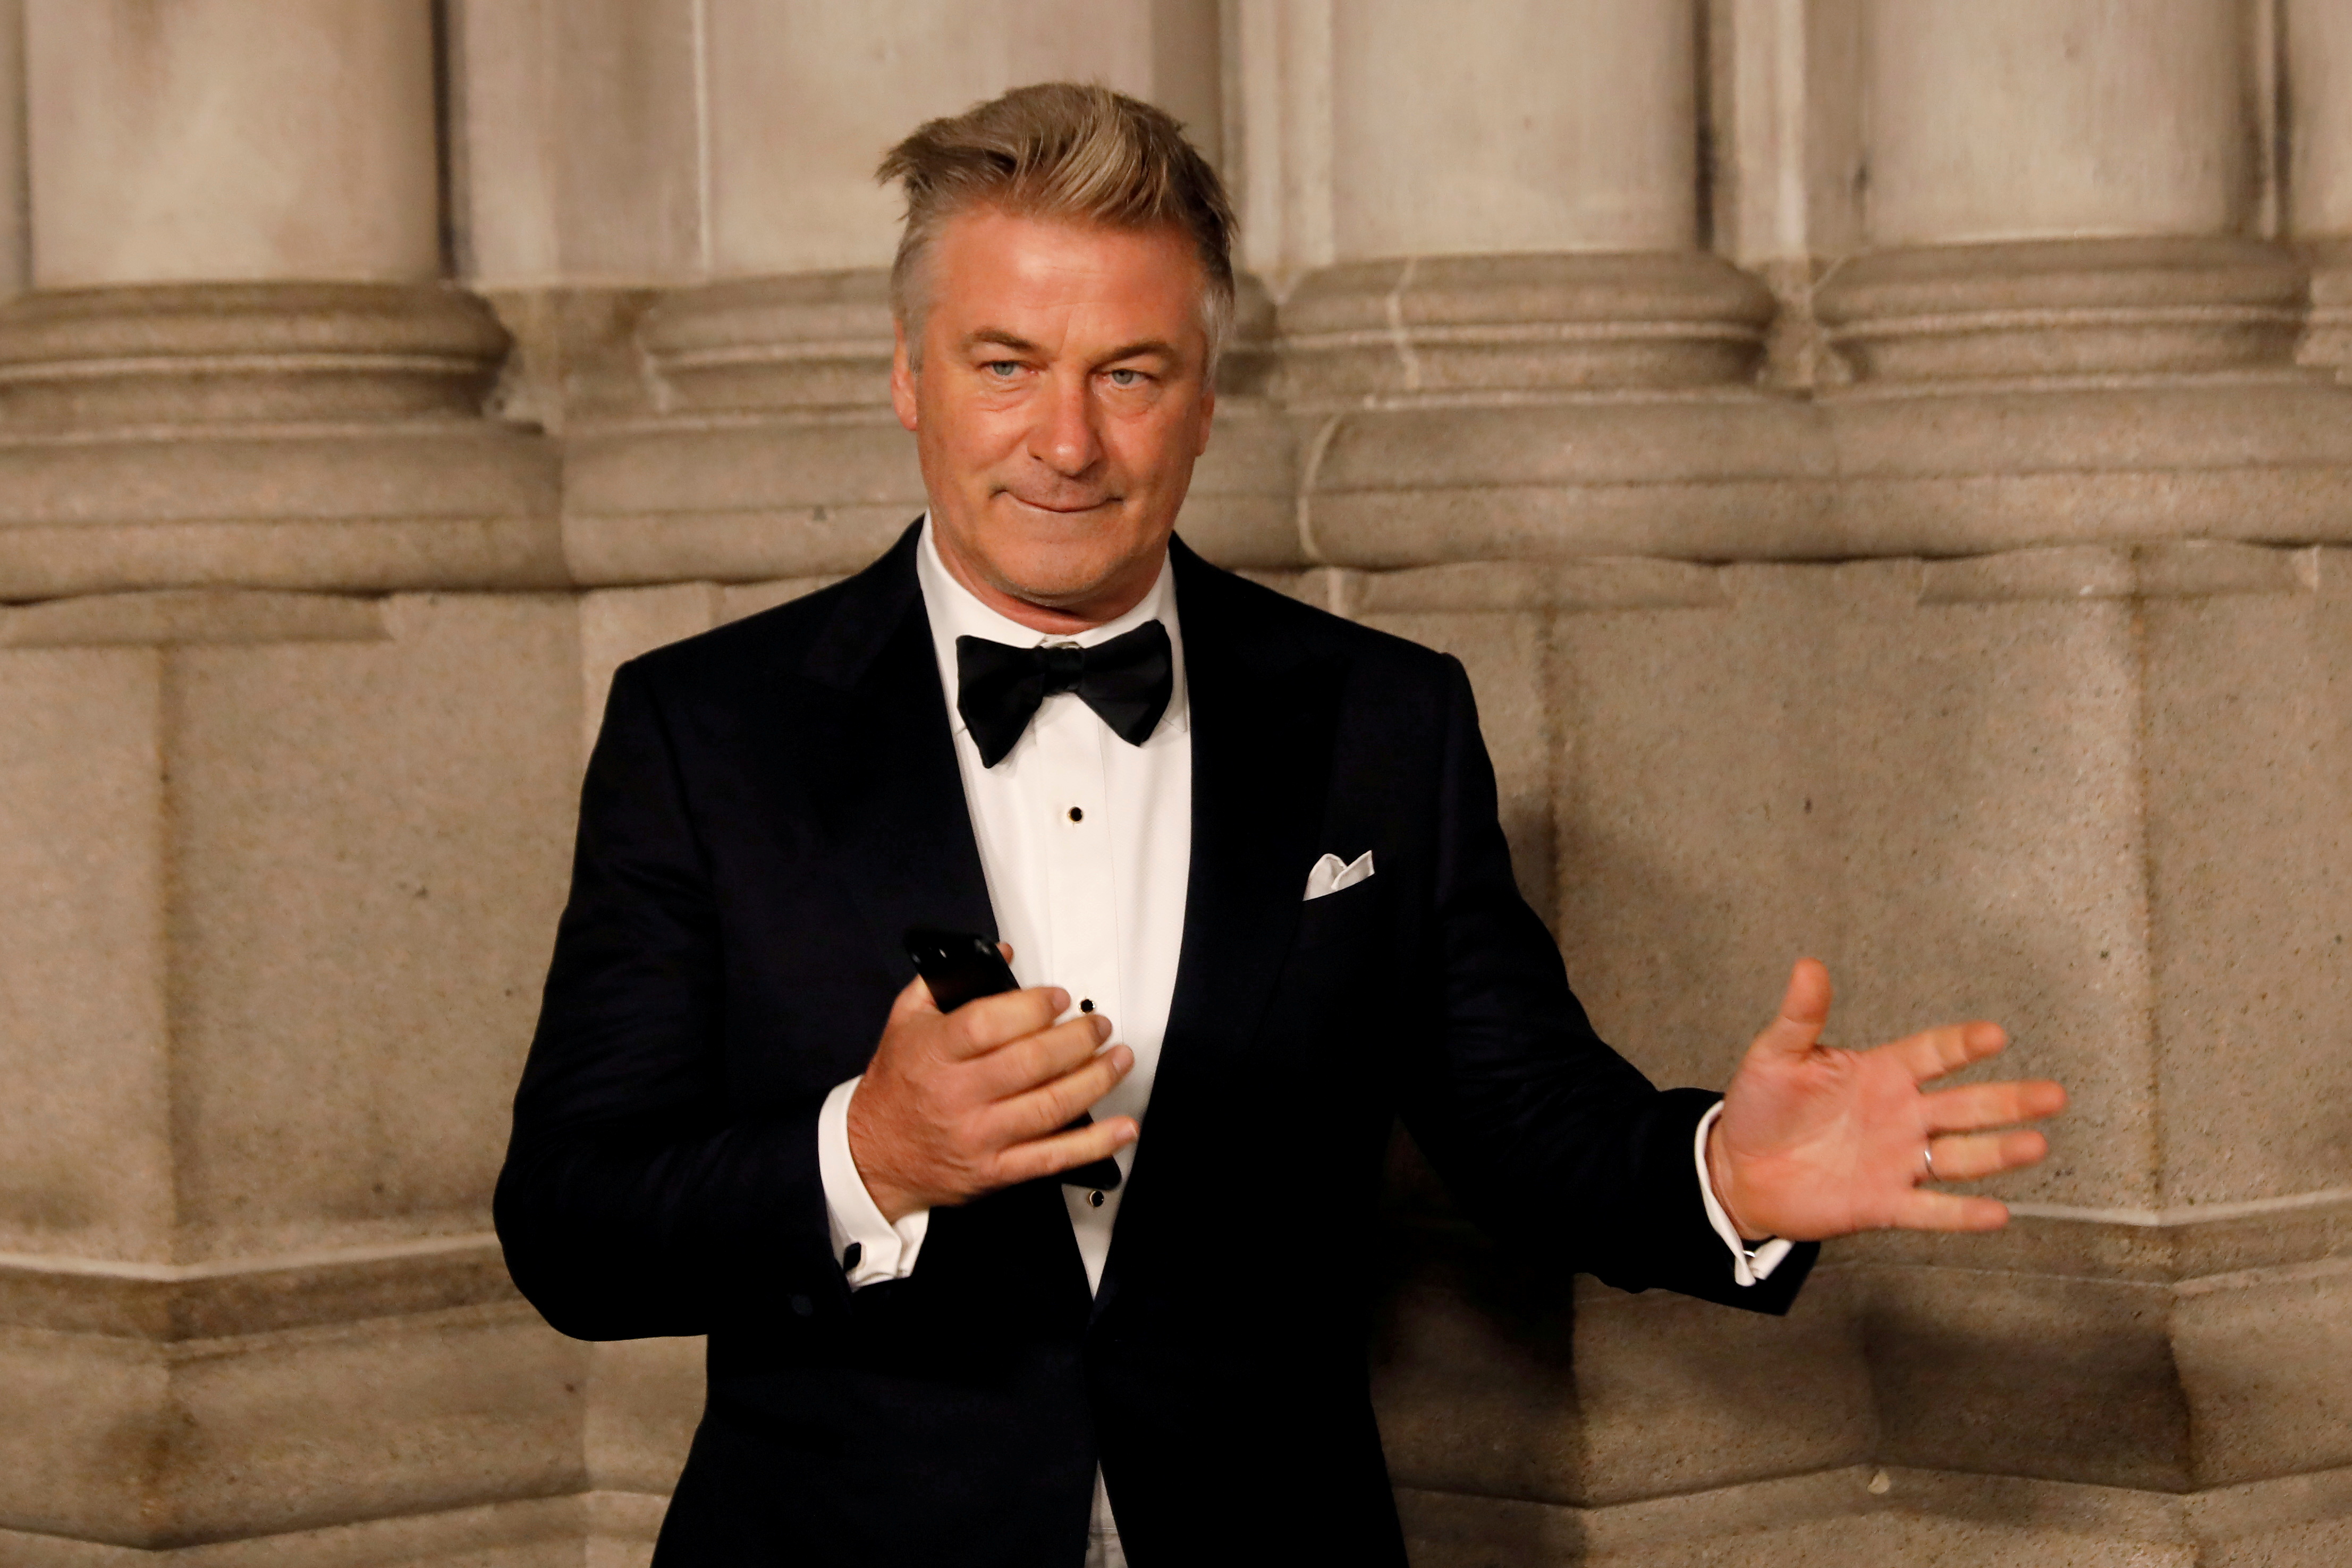 Actor Alec Baldwin gestures before walking on the red carpet during the commemoration of the Elton John AIDS Foundation 25th year fall gala at the Cathedral of St. John the Divine in New York City, in New York, U.S. November 7, 2017. REUTERS/Shannon Stapleton